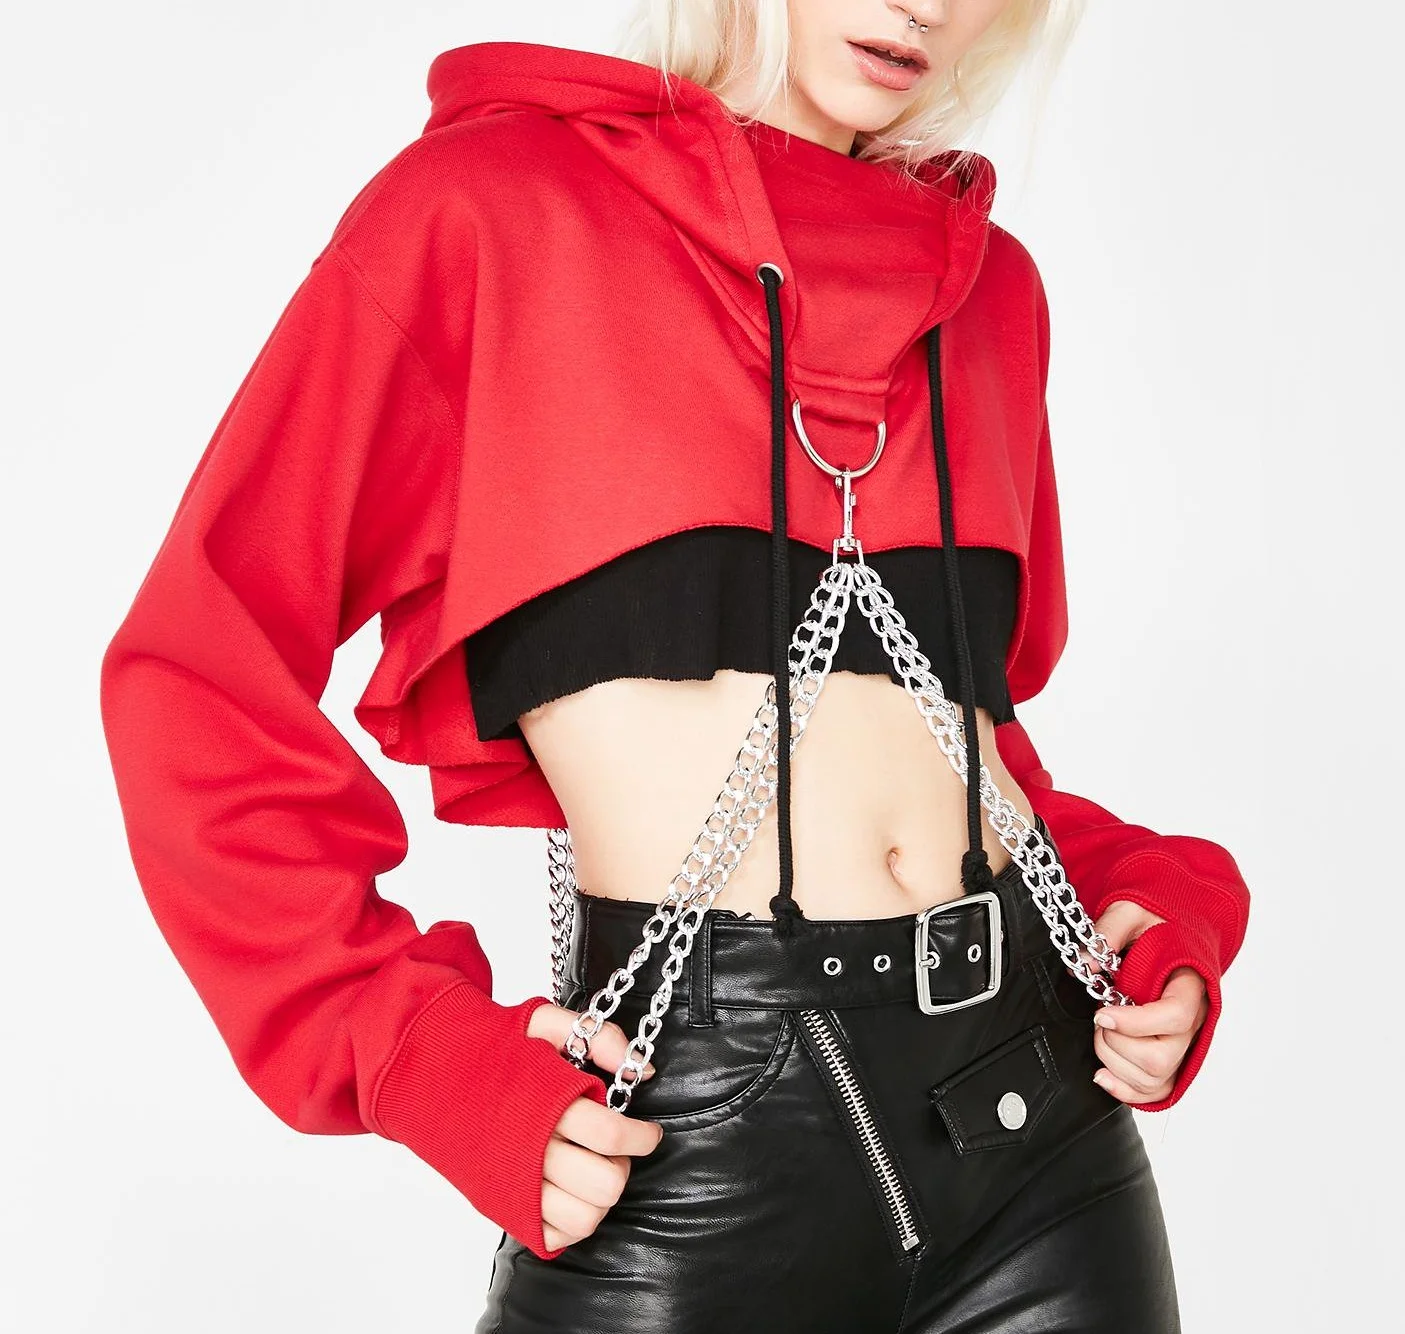 InsGoth Black Red Cropped Hoodie Women Gothic Punk Loose Chain Patchwork Pullover Sweatshirt Lady Fashion Streetwear Hooded Top